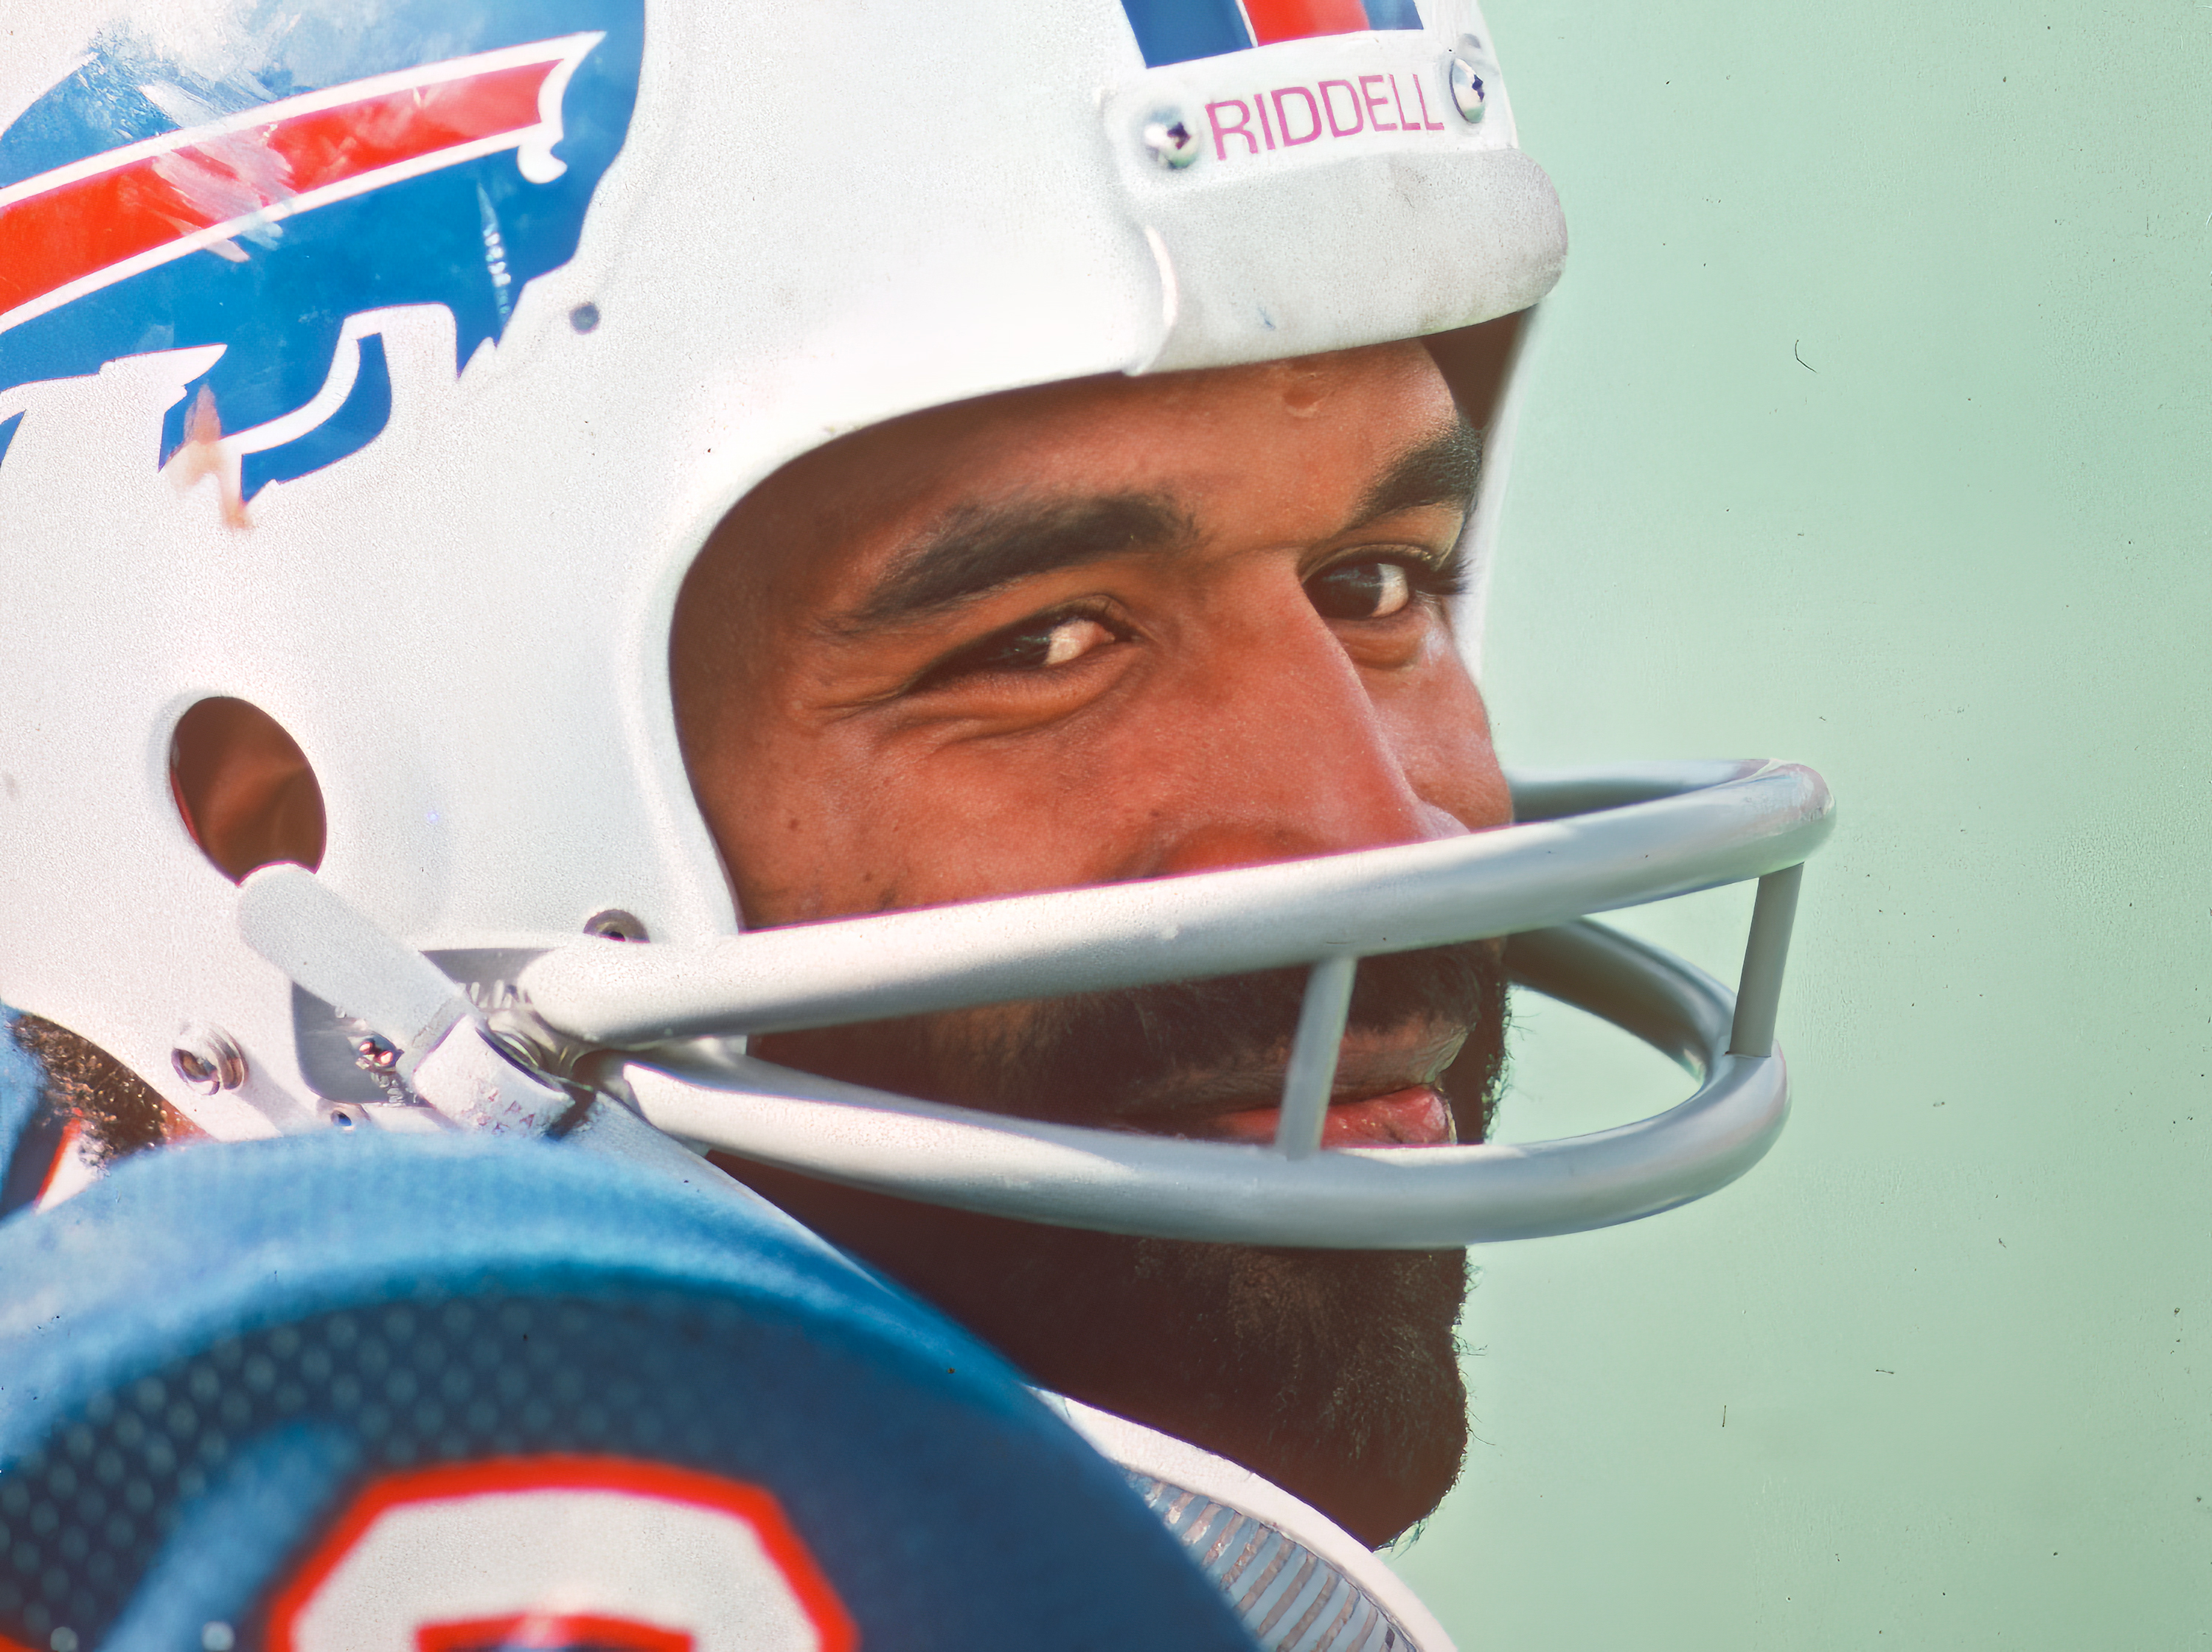 O.J. Simpson looks on from the sideline during a Buffalo Bills football game in 1975.